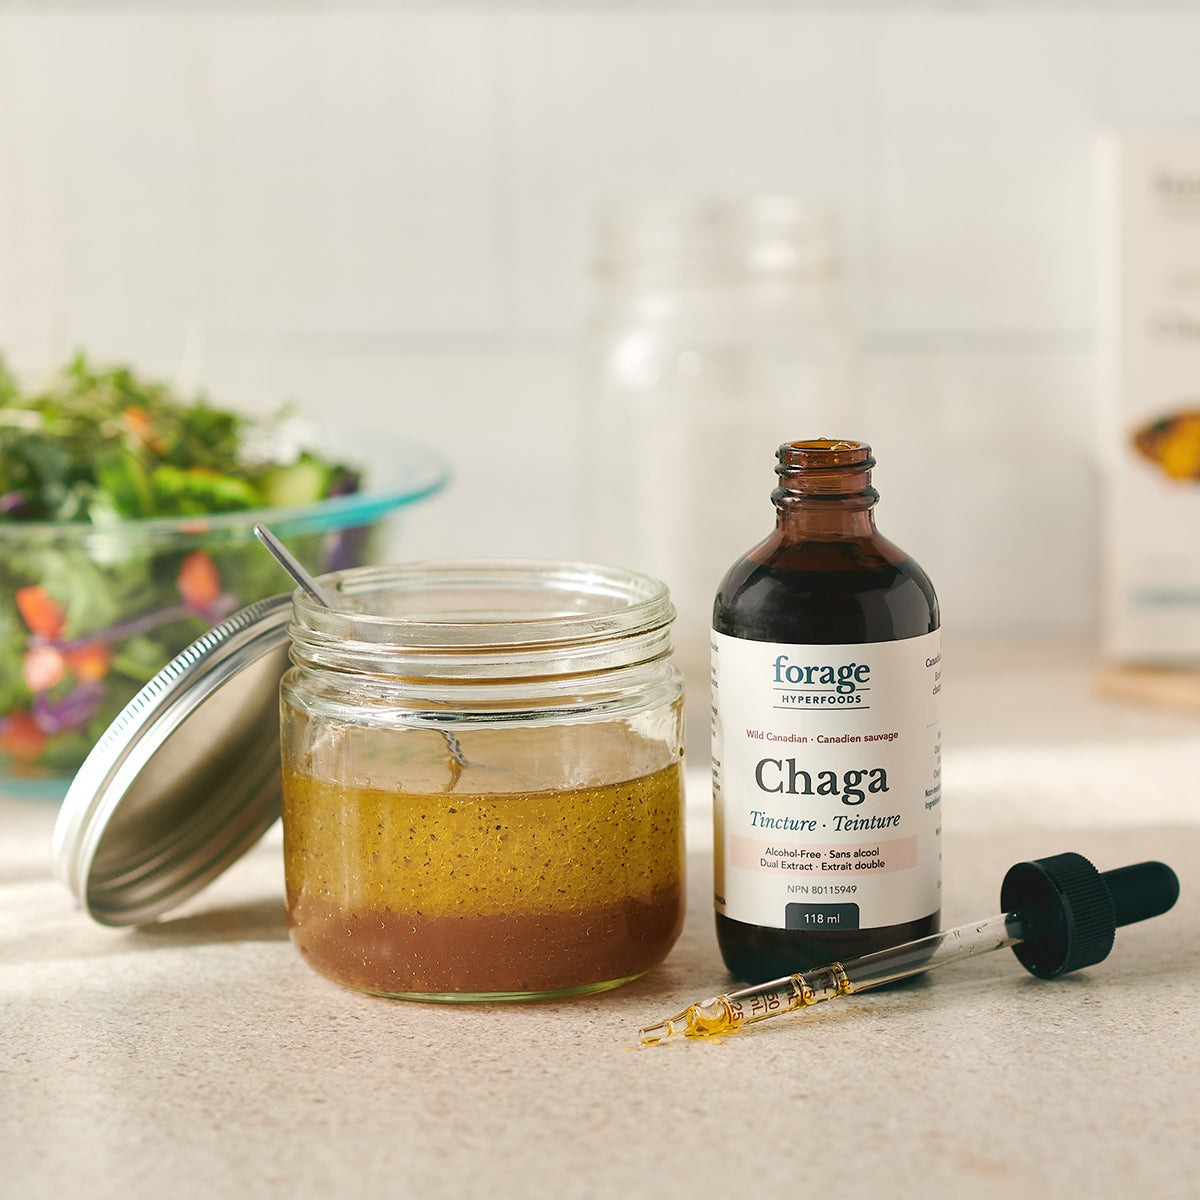 A Forage Hyperfoods Chaga tincture in the alcohol-free format next to a healthy salad dressing, which the tuncture has been added to showing its everyday ease of use. Easy to apply to your day to day foods.